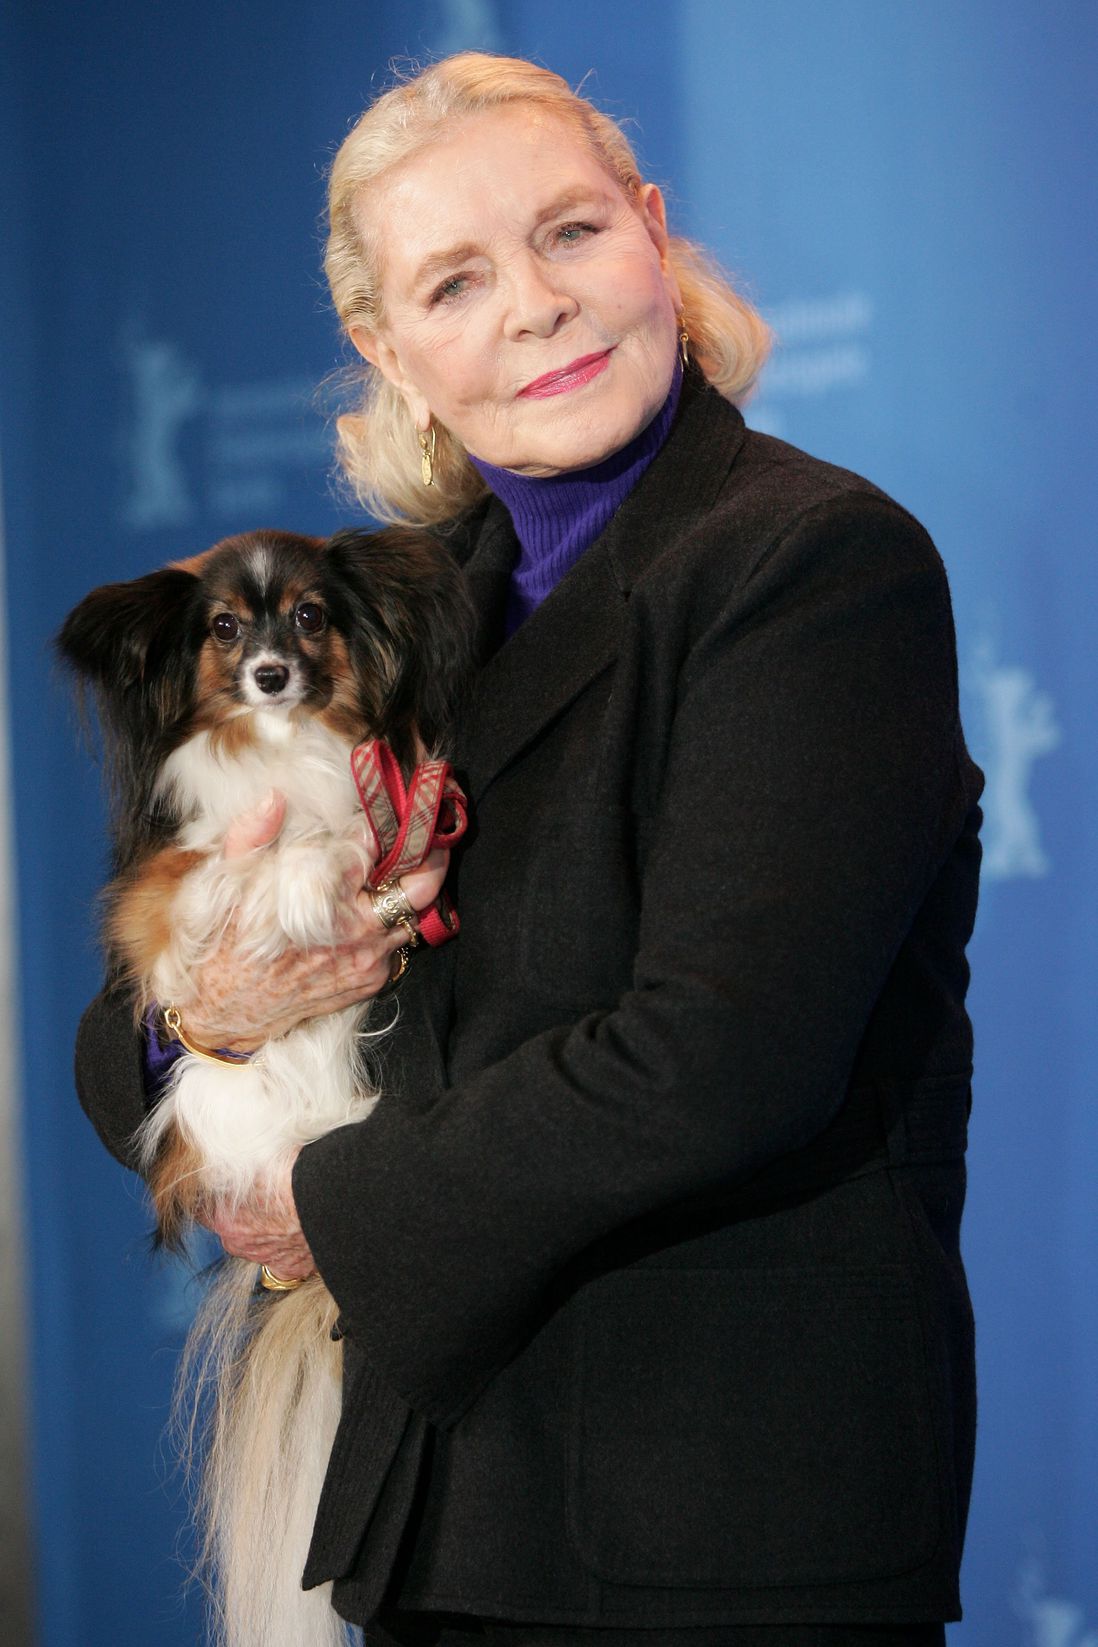 In 2007, with her dog<br>